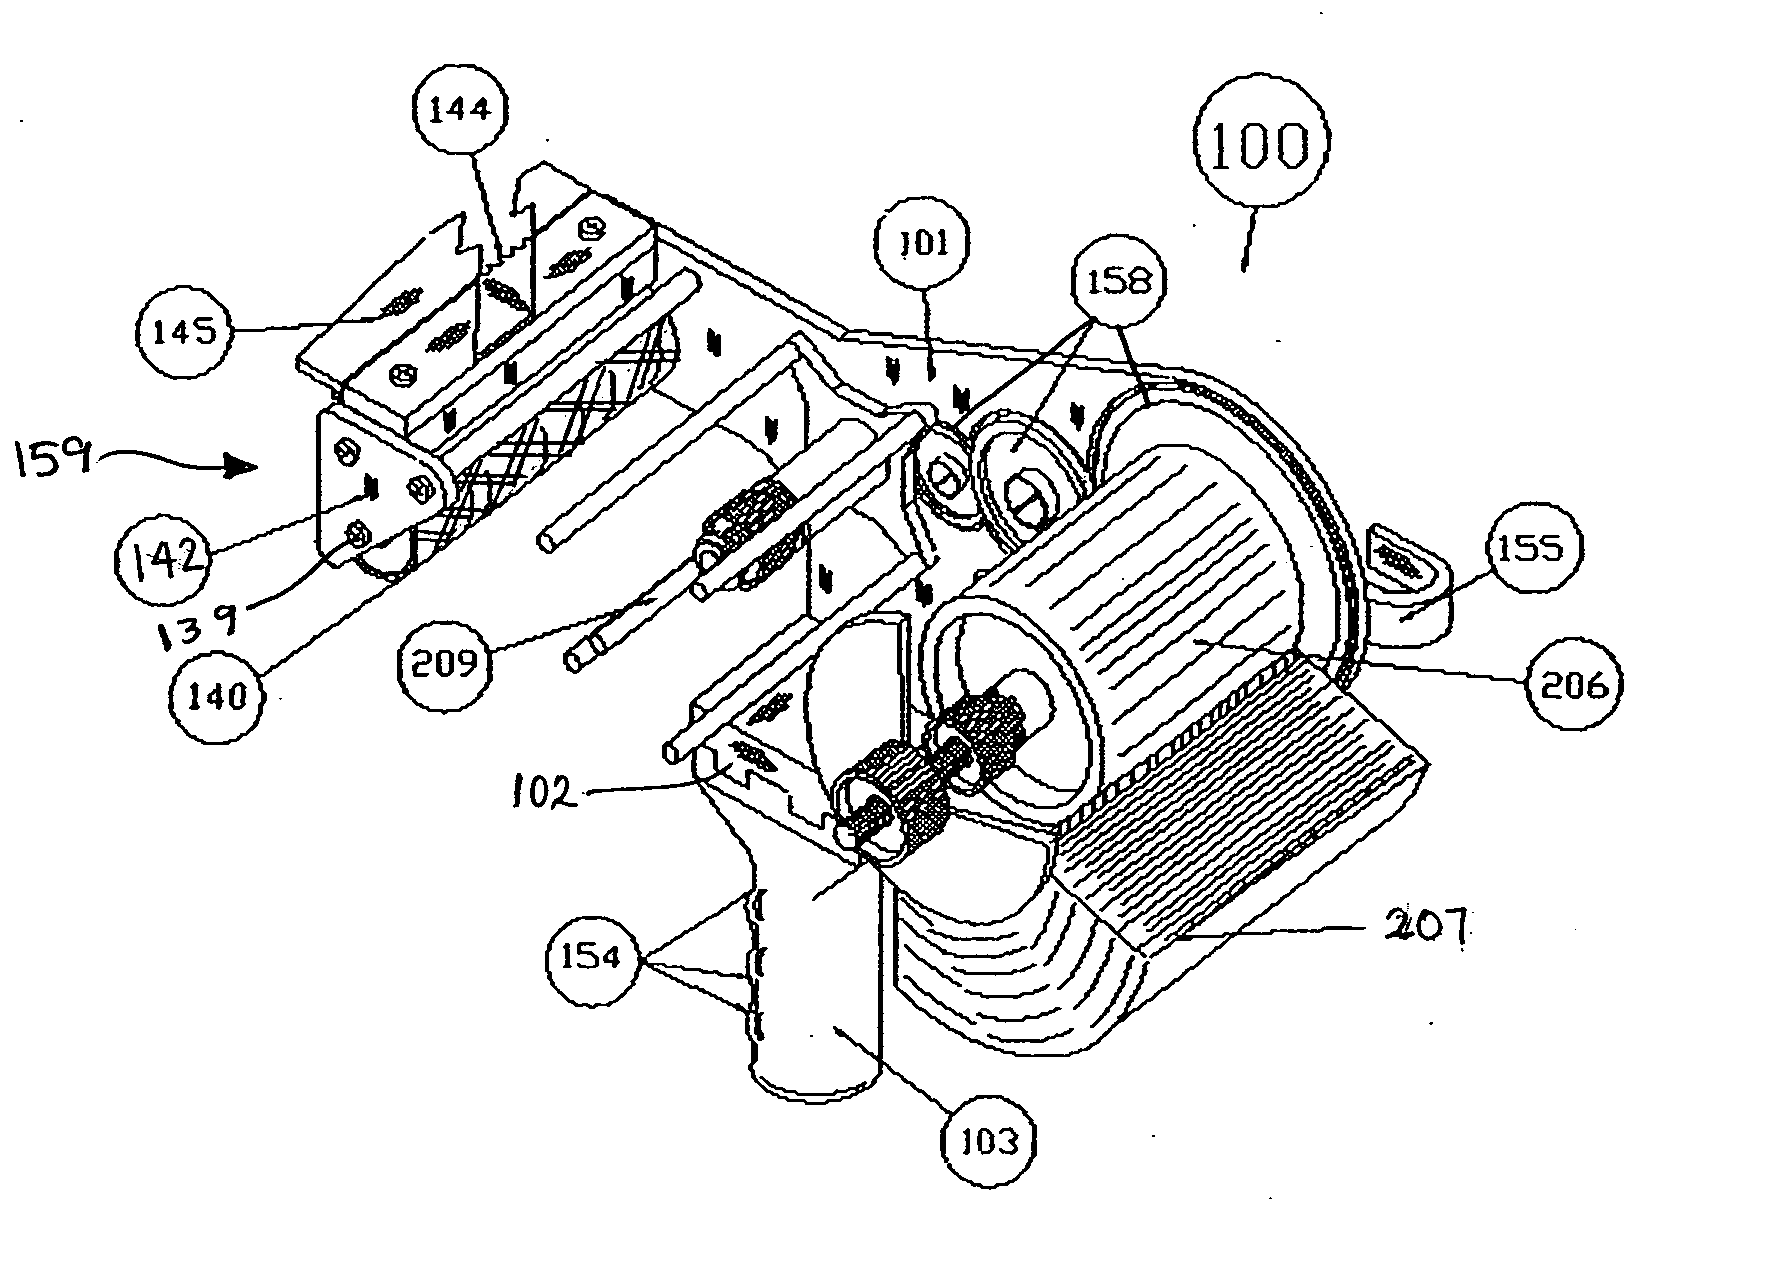 Tape pressure roller with patterned surface for tape applicator